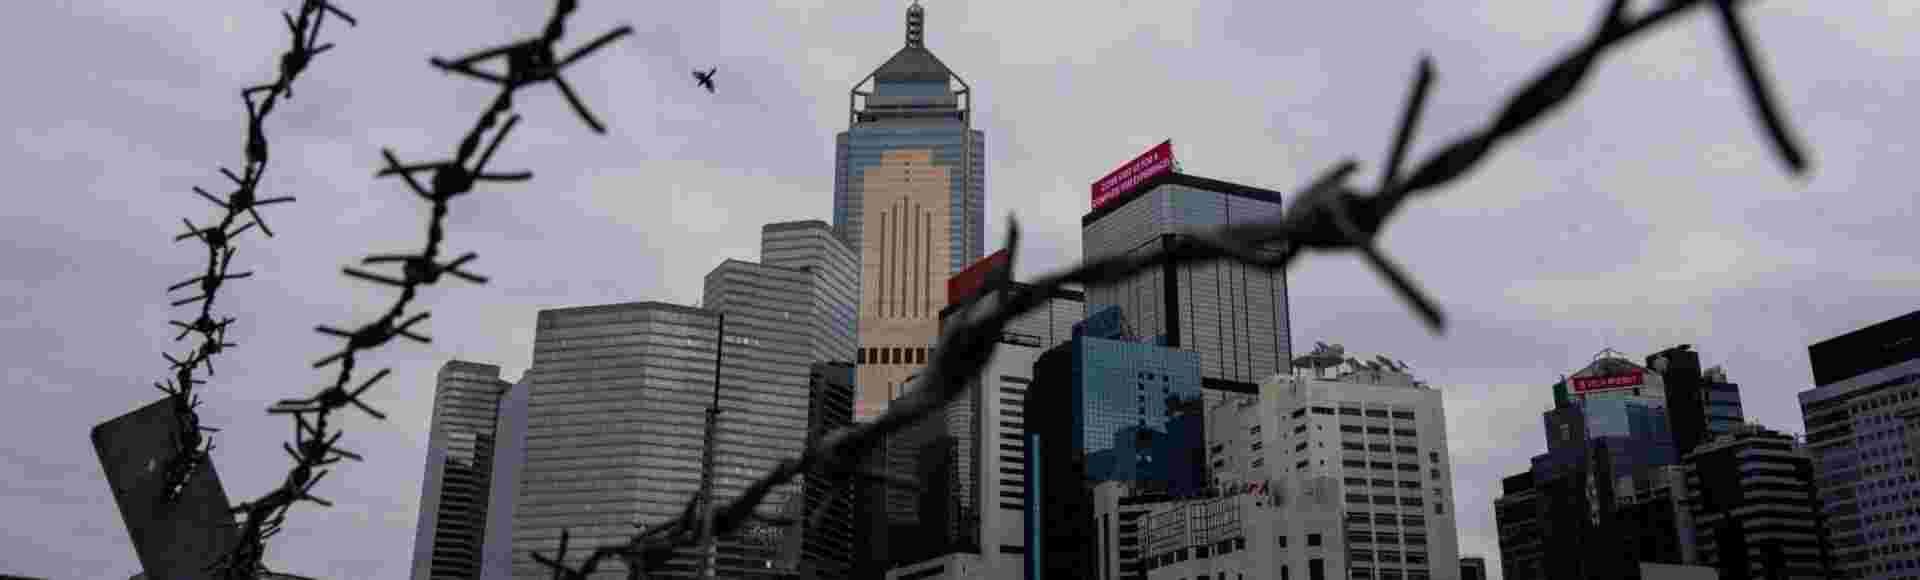 Hong Kong viewed through barbed wire.